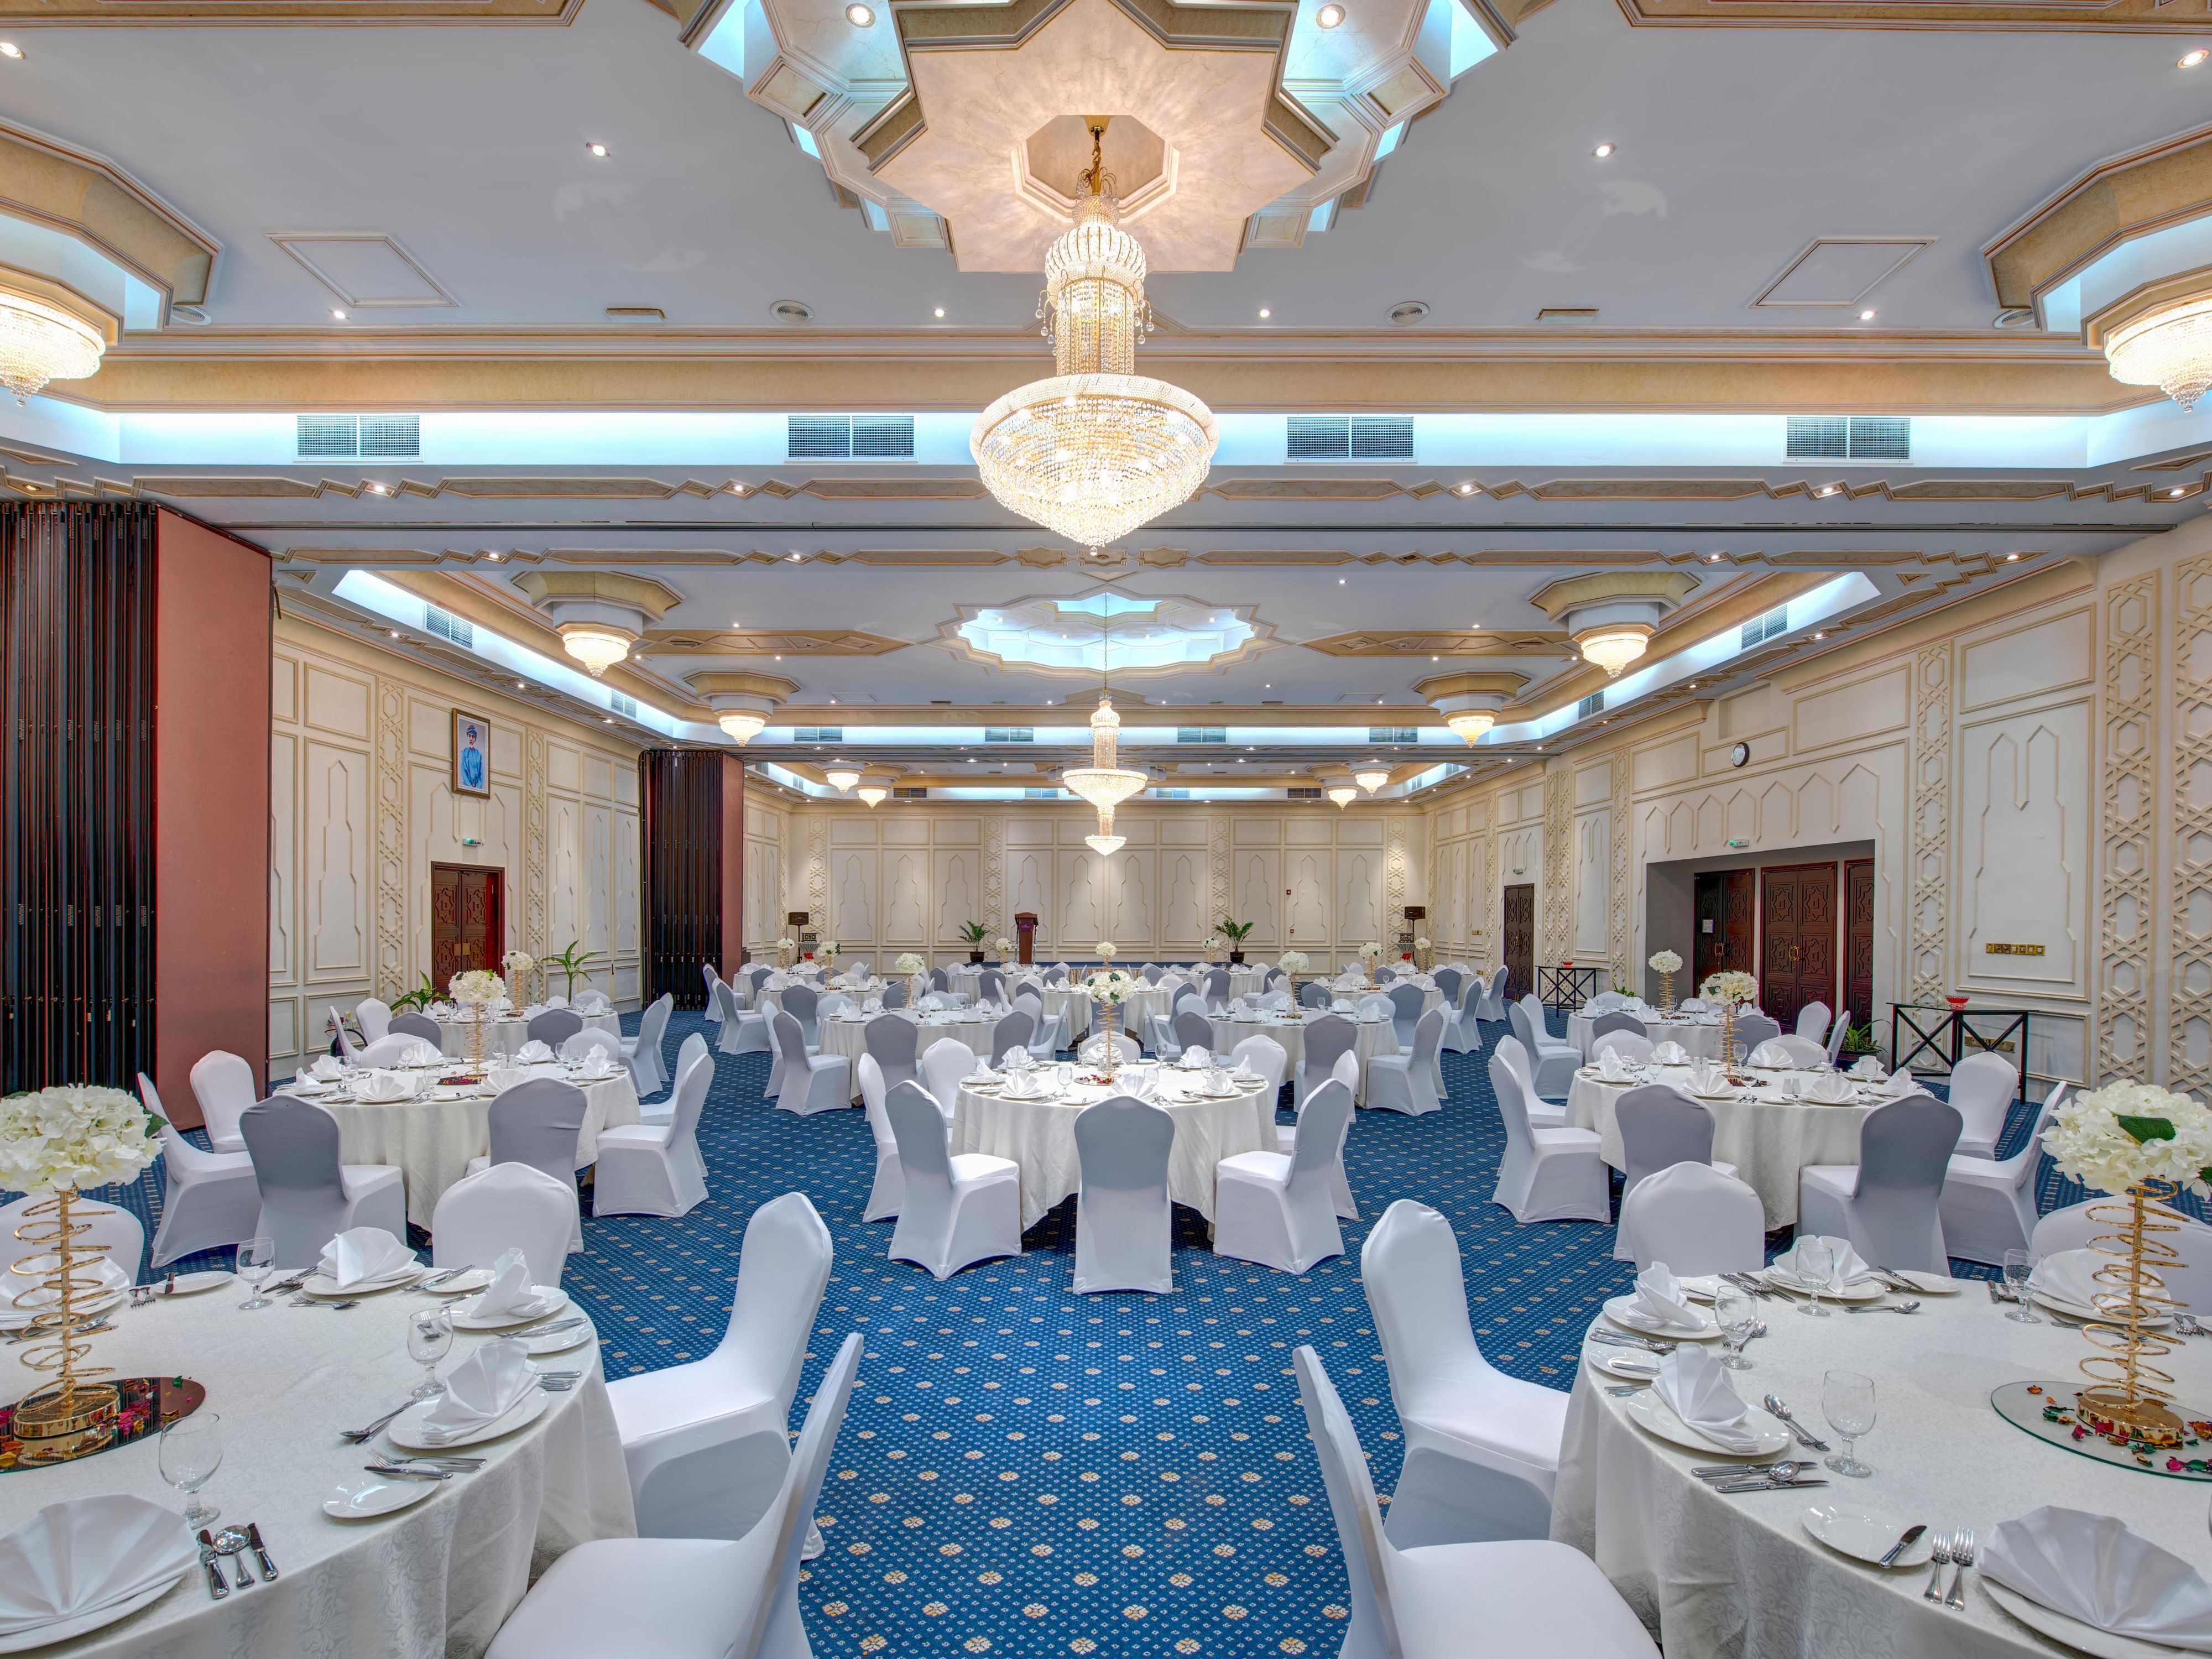 Our Dhofar Ballroom is equipped and caters to any social or business event, such as gala dinner, wedding, cocktails, meetings, seminars and conferences, product launches and more. Whichever your requirement, you will find that the Crowne Plaza Resort Salalah offers the best suited solution to your needs.